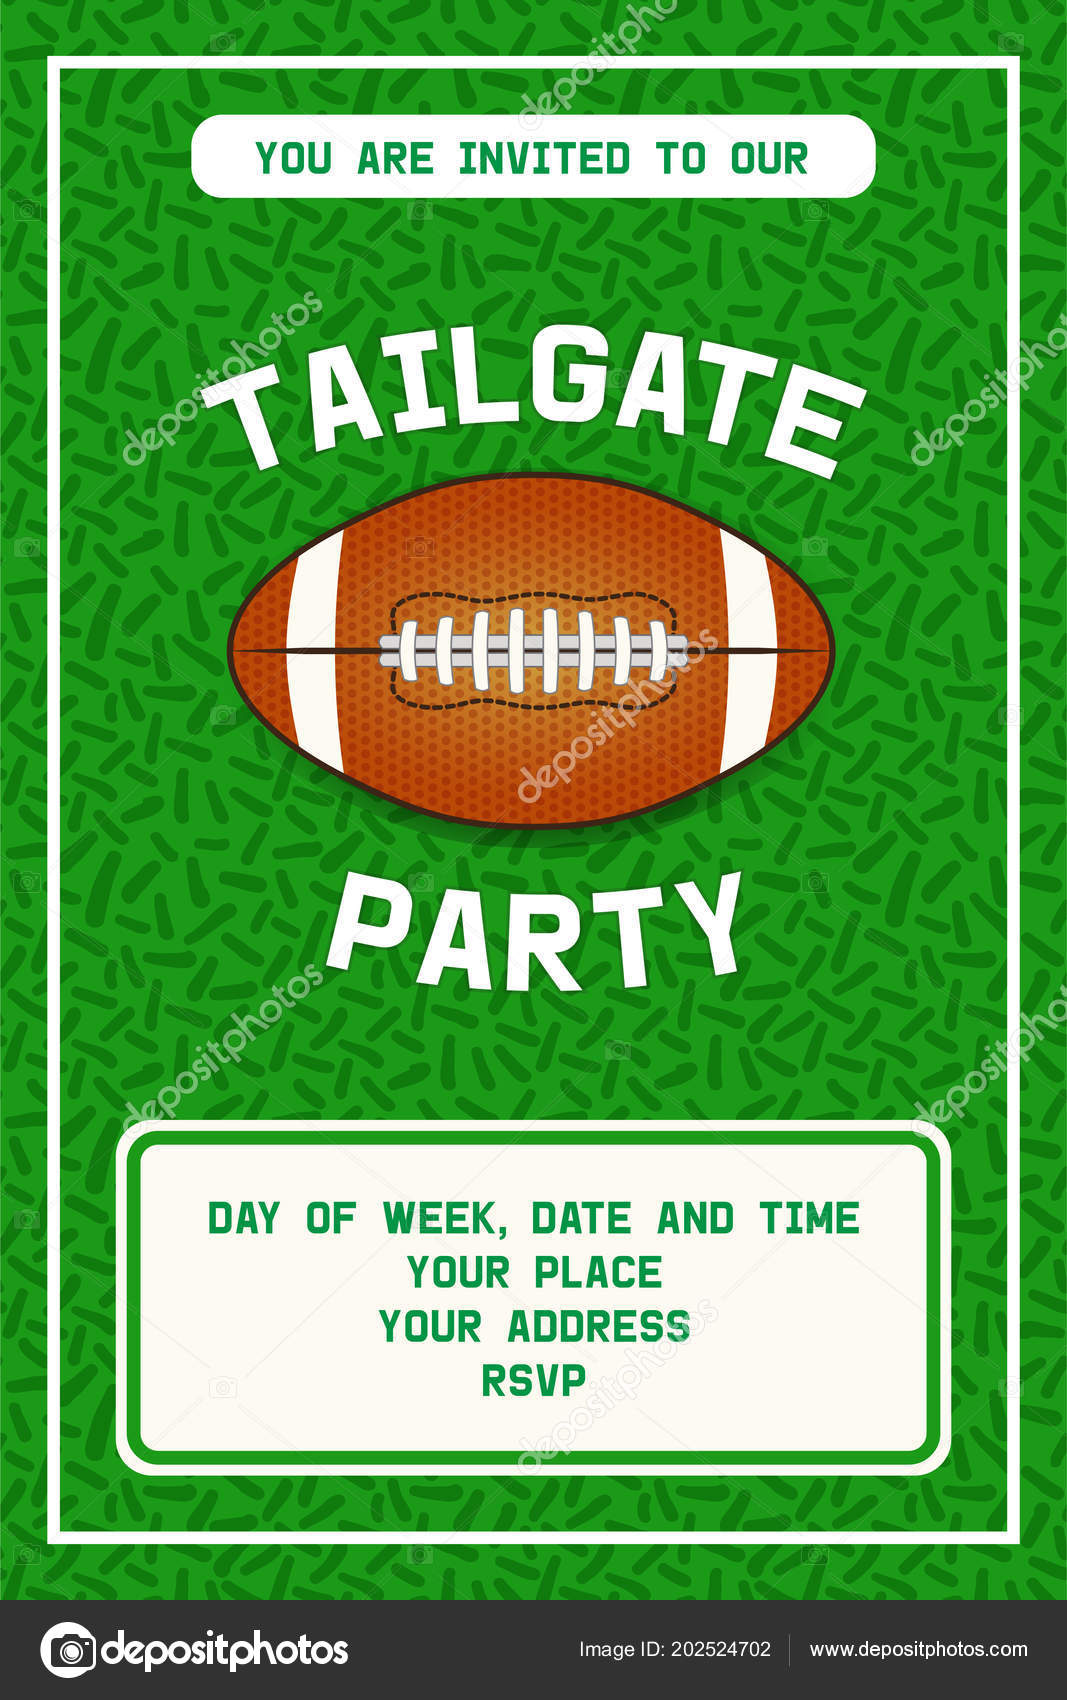 180 Tailgating Vector Images Tailgating Illustrations Depositphotos